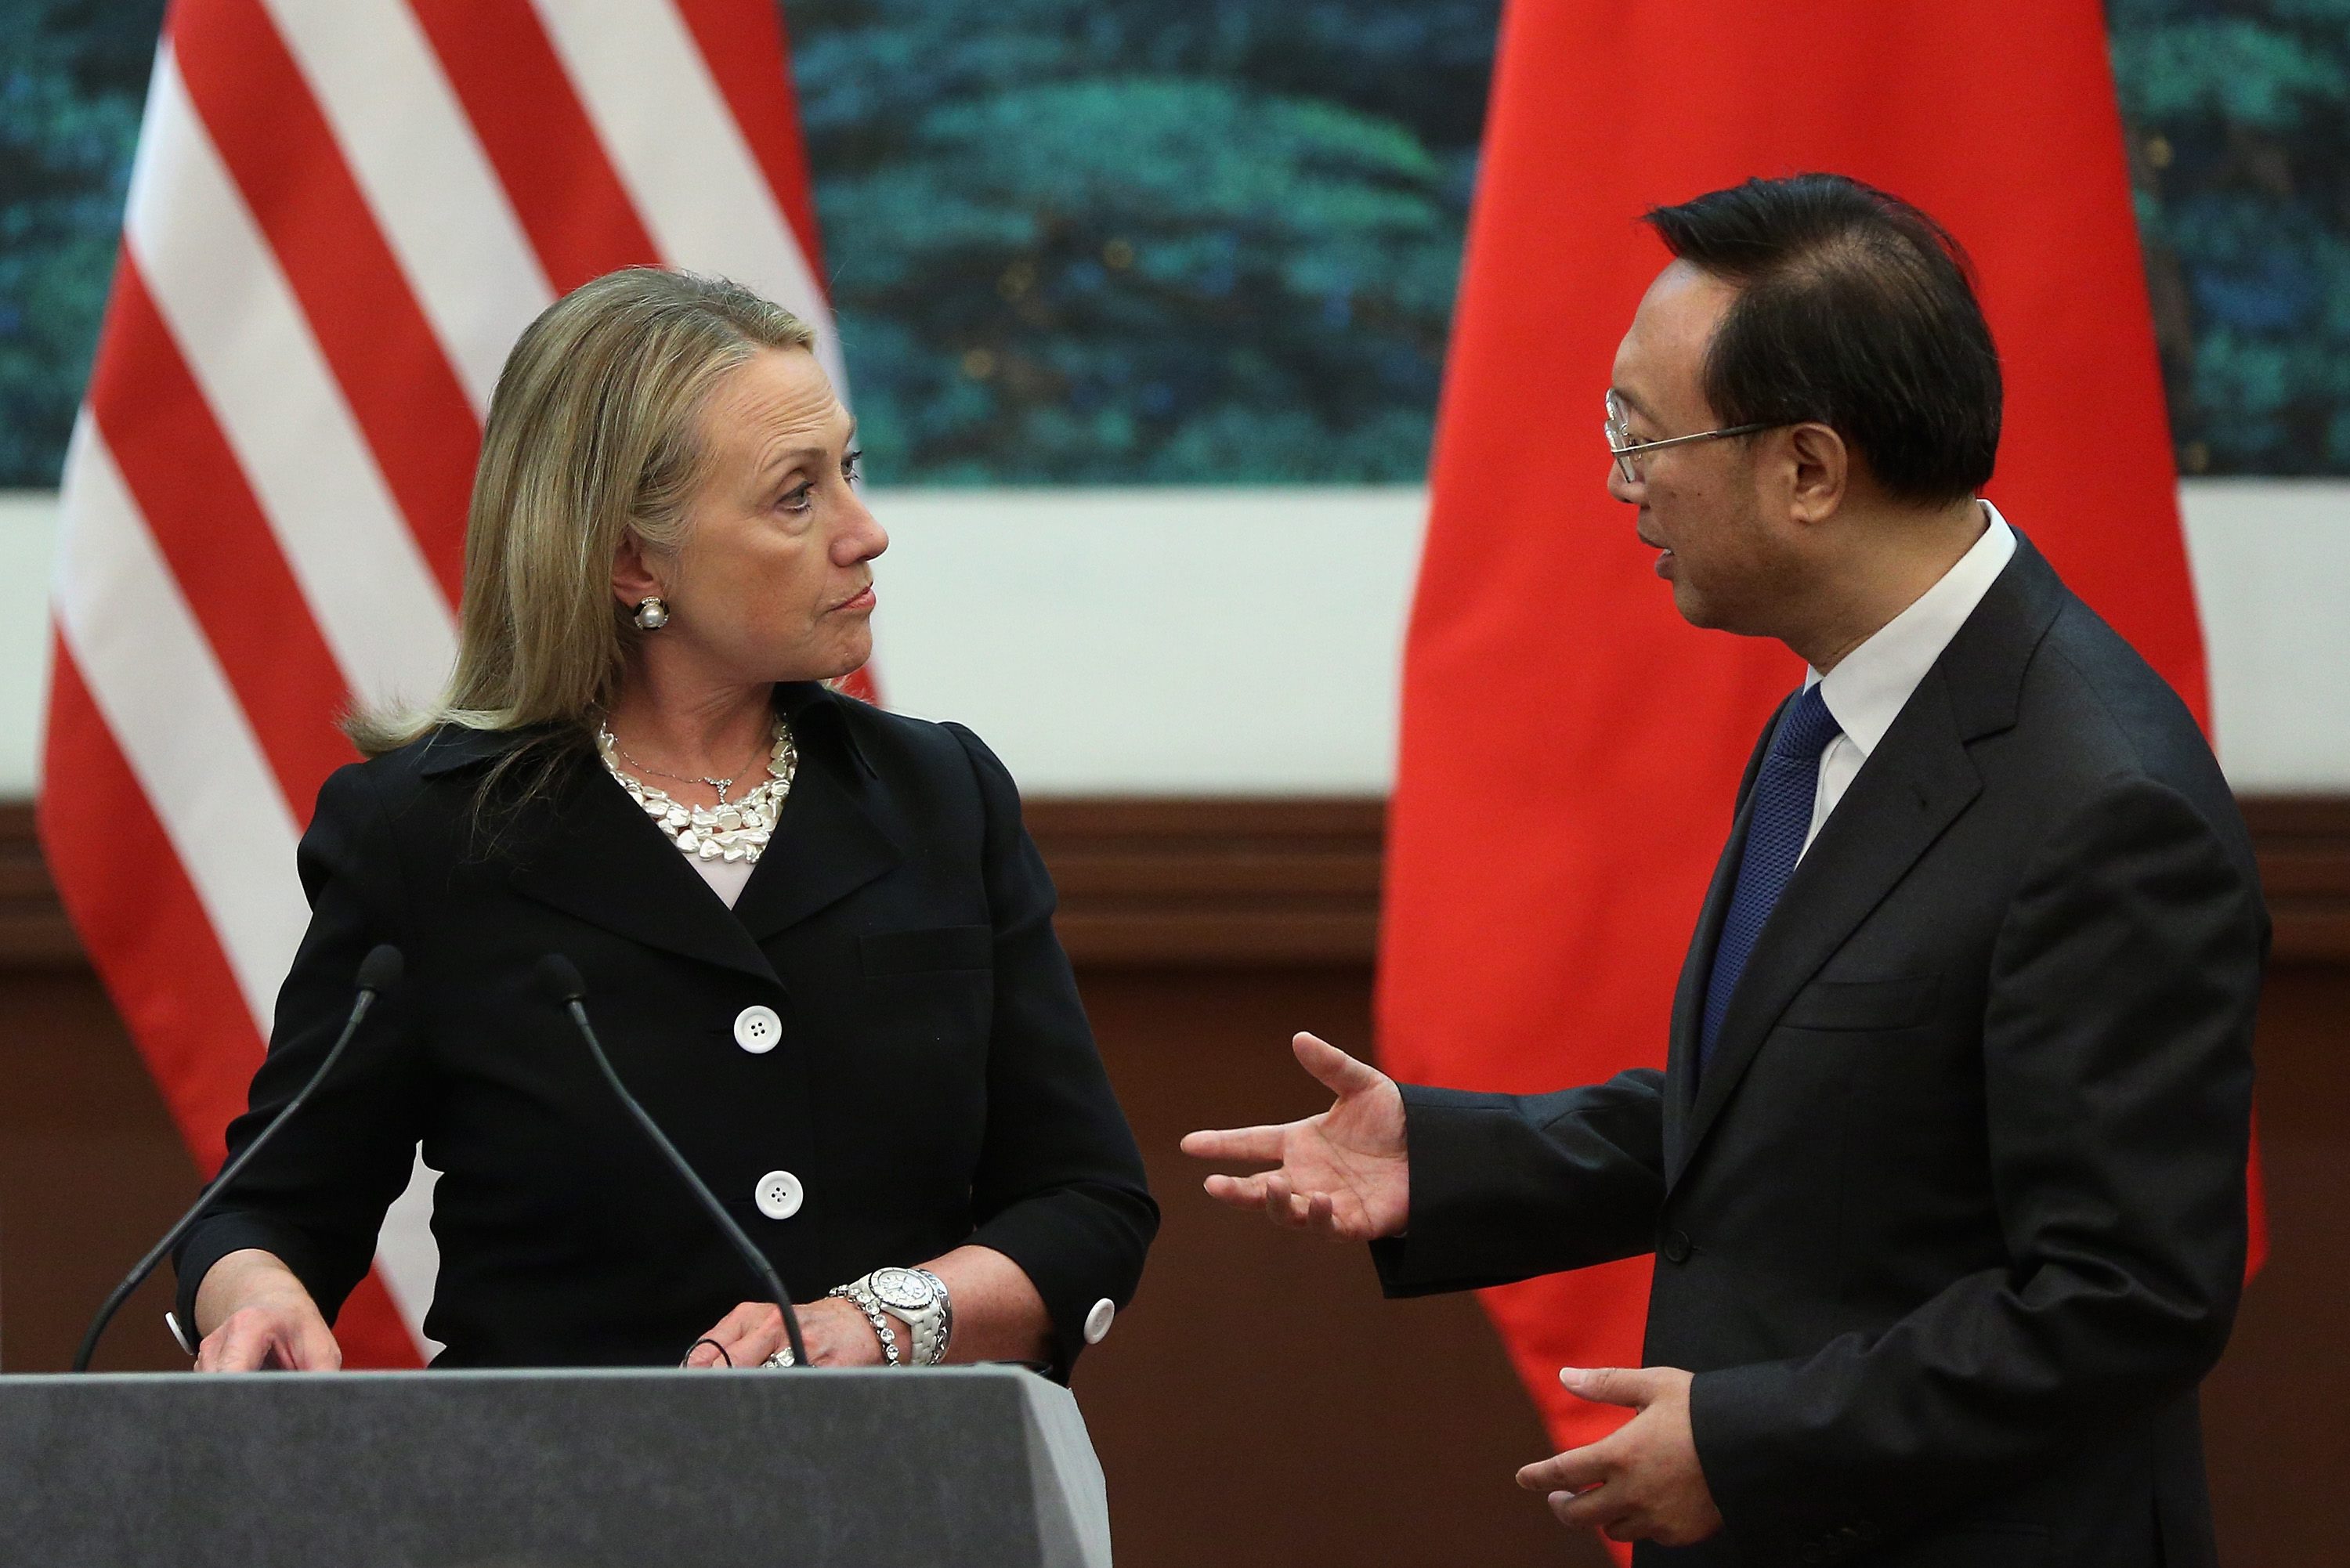 Hillary Clinton, then the US secretary of state, meets Chinese foreign minister Yang Jiechi in Beijing in 2012. Clinton is seen by China as something of an anathema, due to her role in the US rebalancing strategy and efforts to restrict China’s rise. Photo: EPA